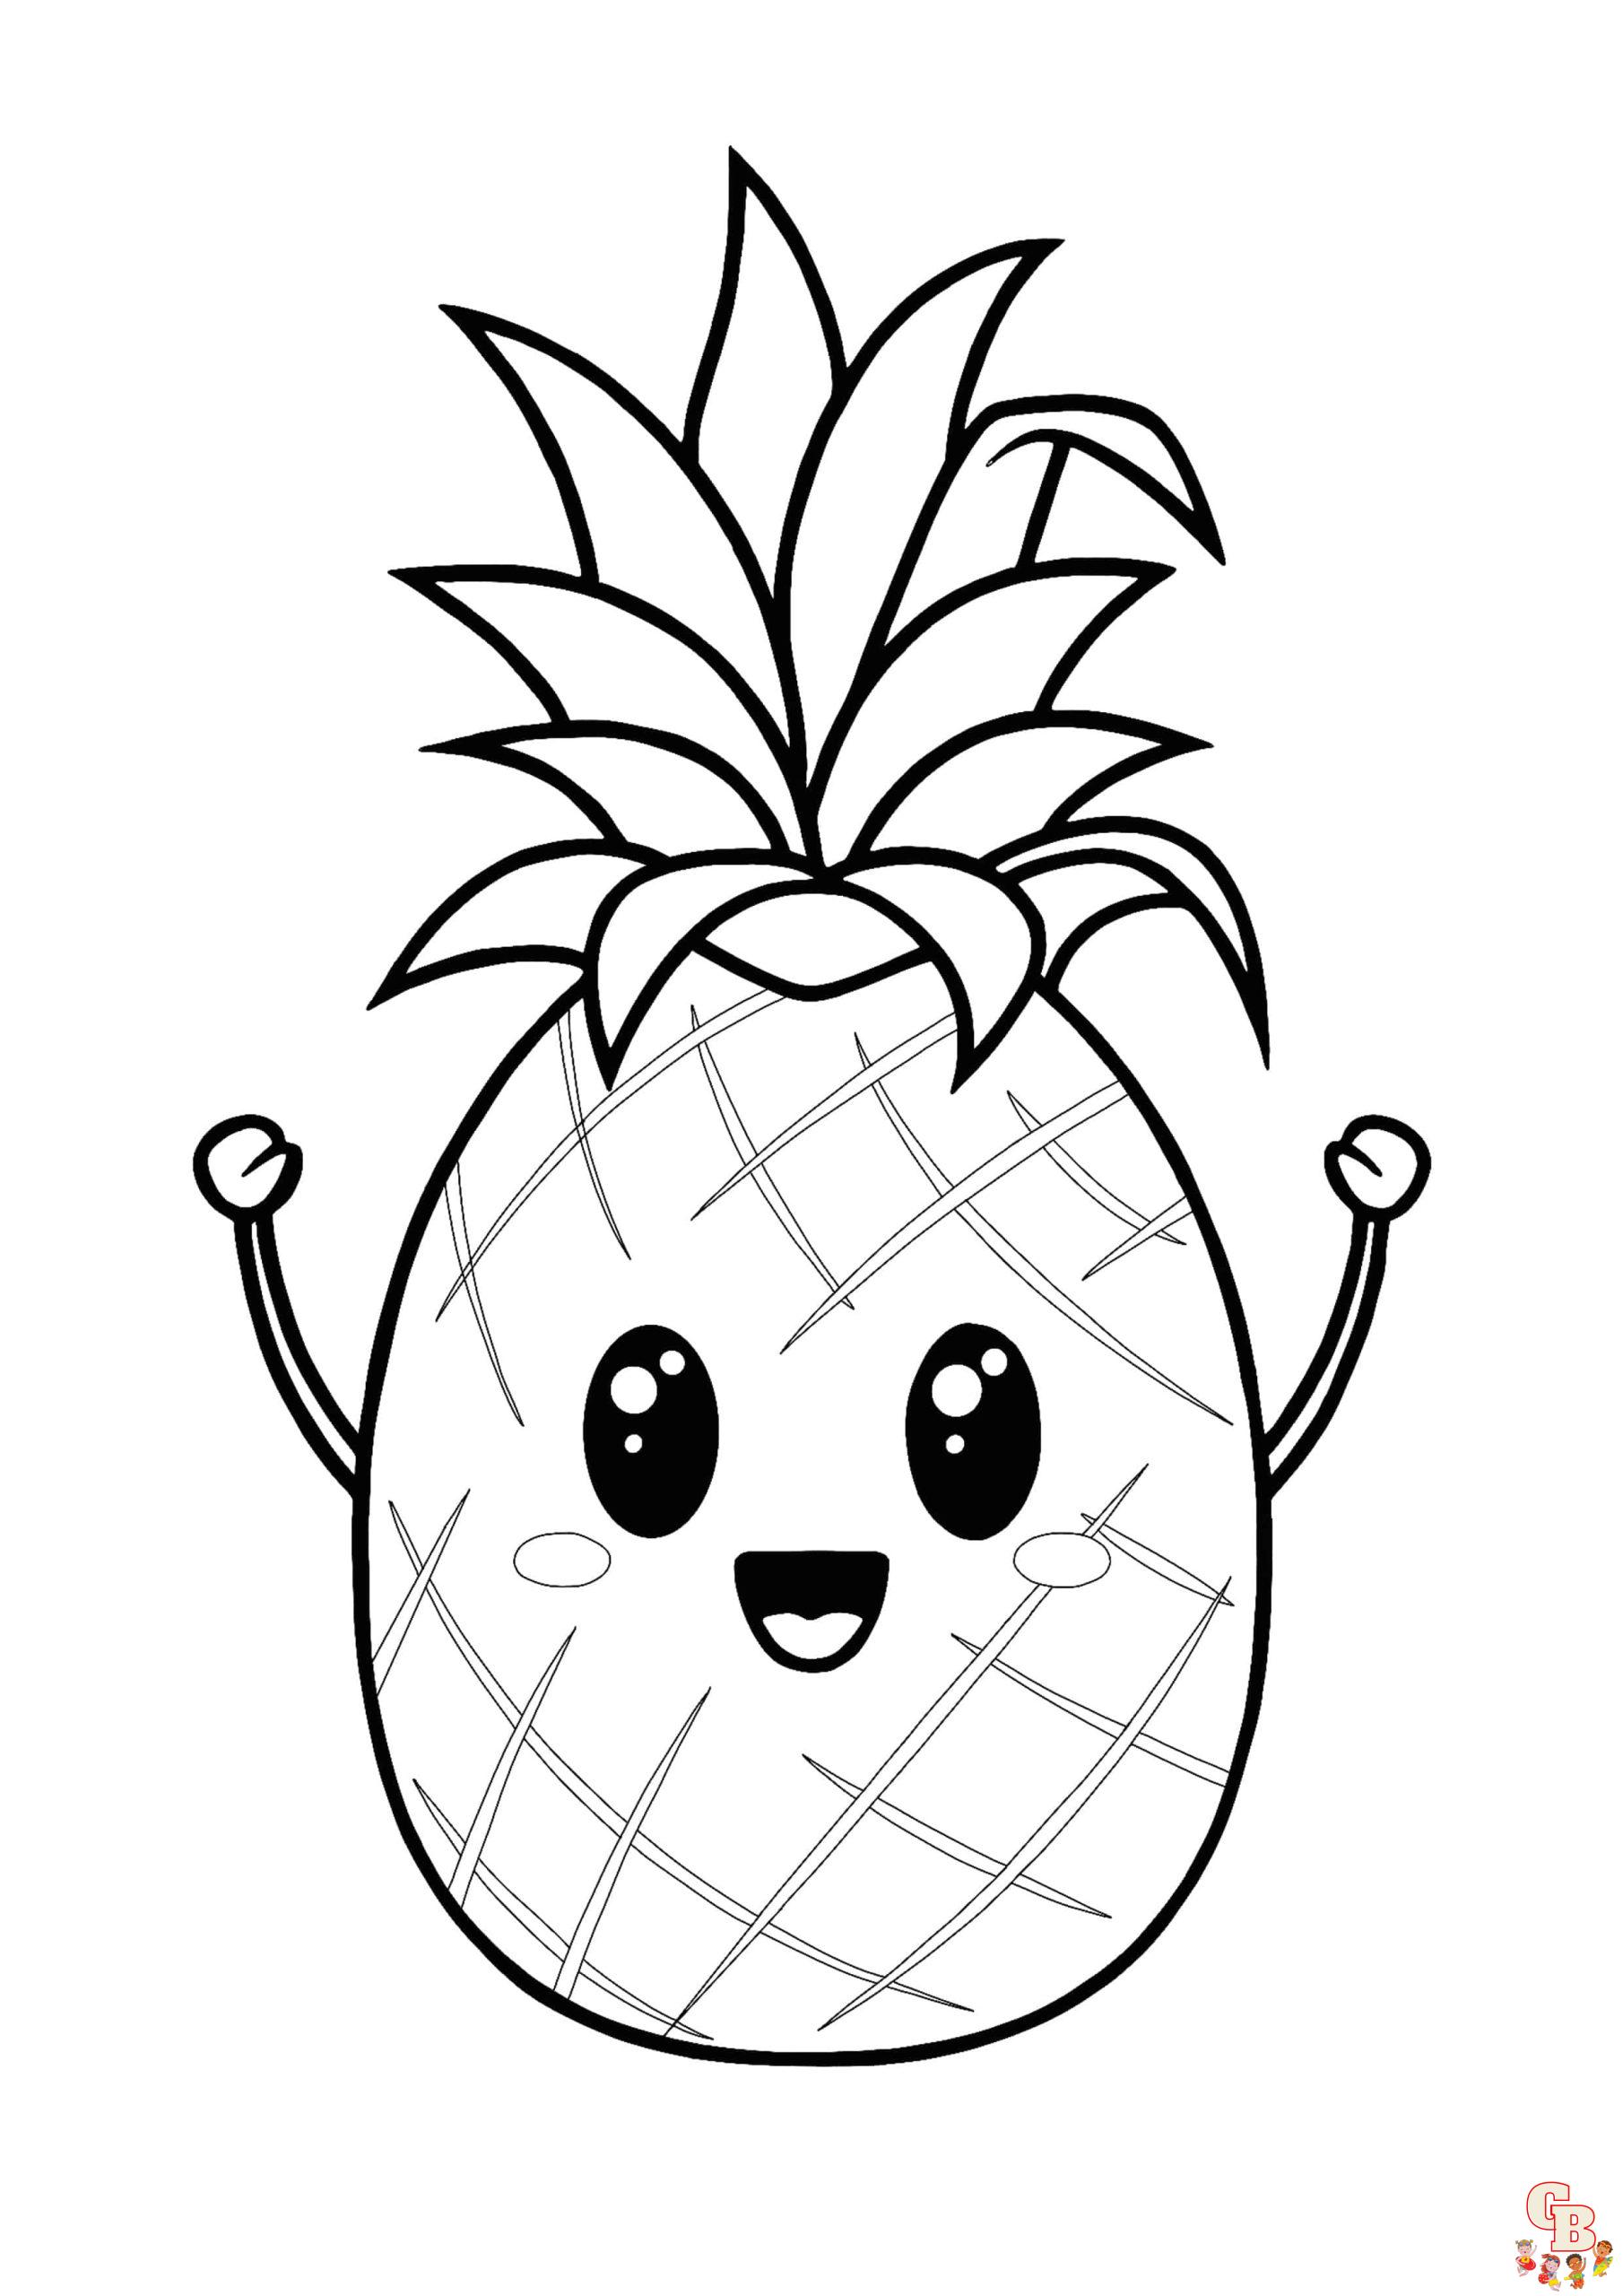 Pineapple Coloring Pages 2